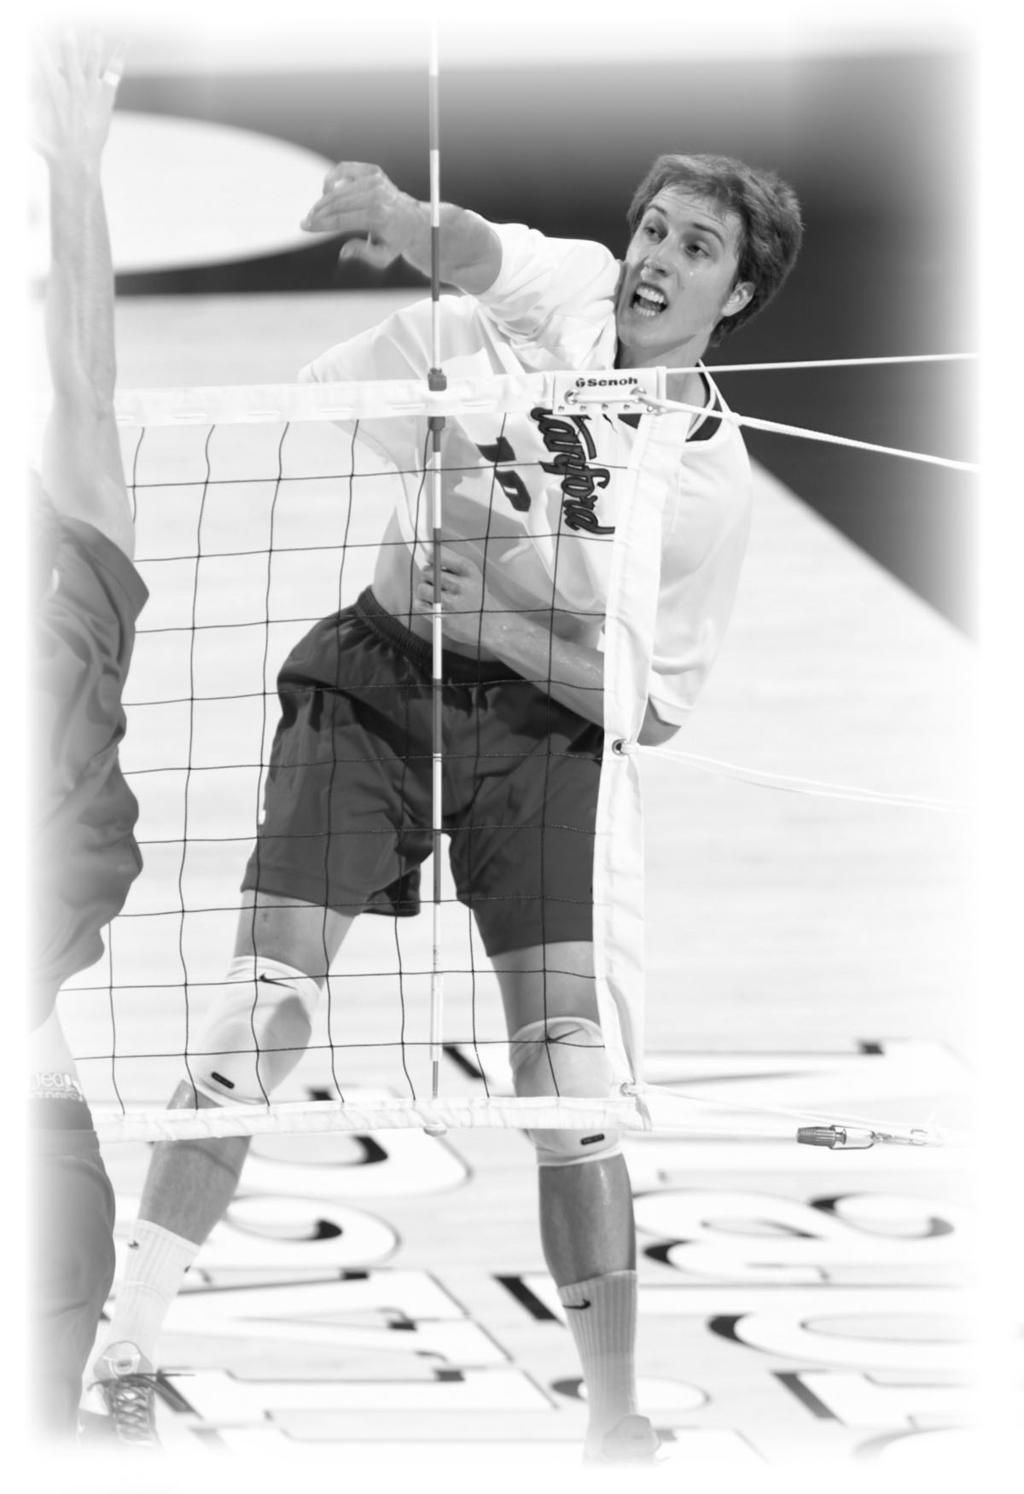 2 0 0 3 S T A N F O R D V O L L E Y B A L L O U T L O O K after recording 35 kills and 14 blocks in four matches, including a 14-kill, five-block effort against Pacific in the gold medal match.